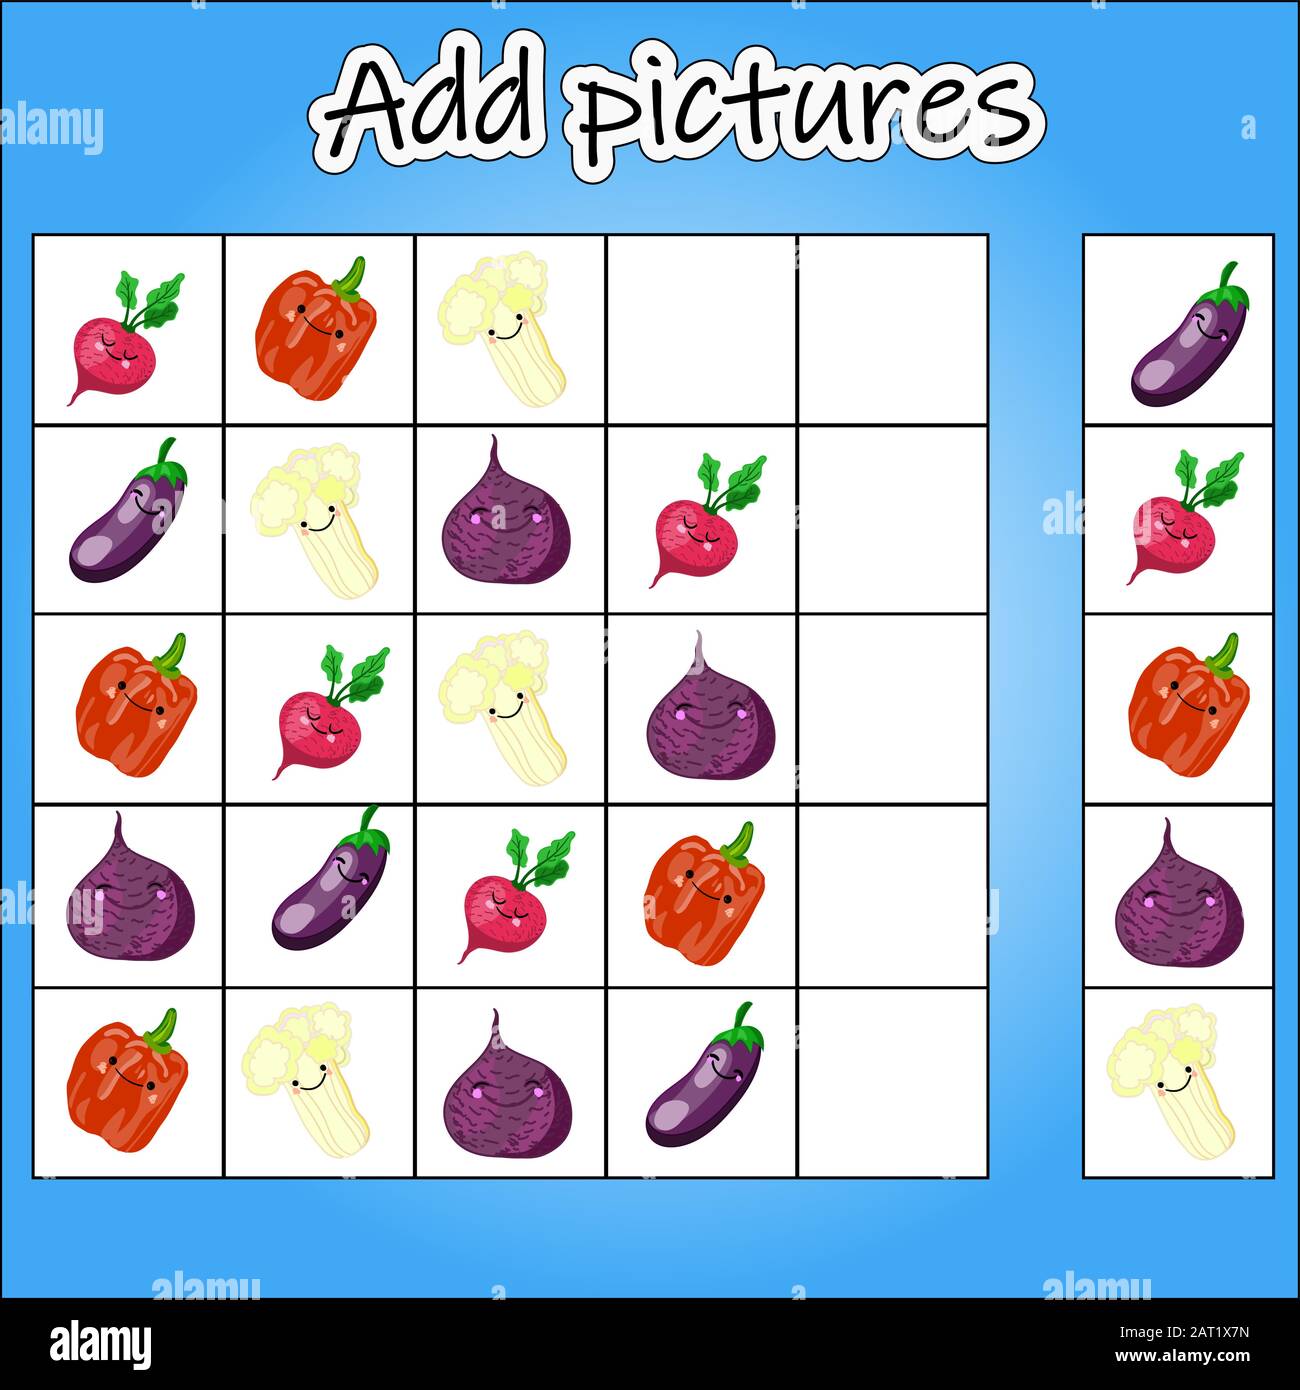 Picture Sudoku is an educational game for the development of children s logical thinking. Level of difficulty 1. Theme vegetables . Insert pictures Stock Vector